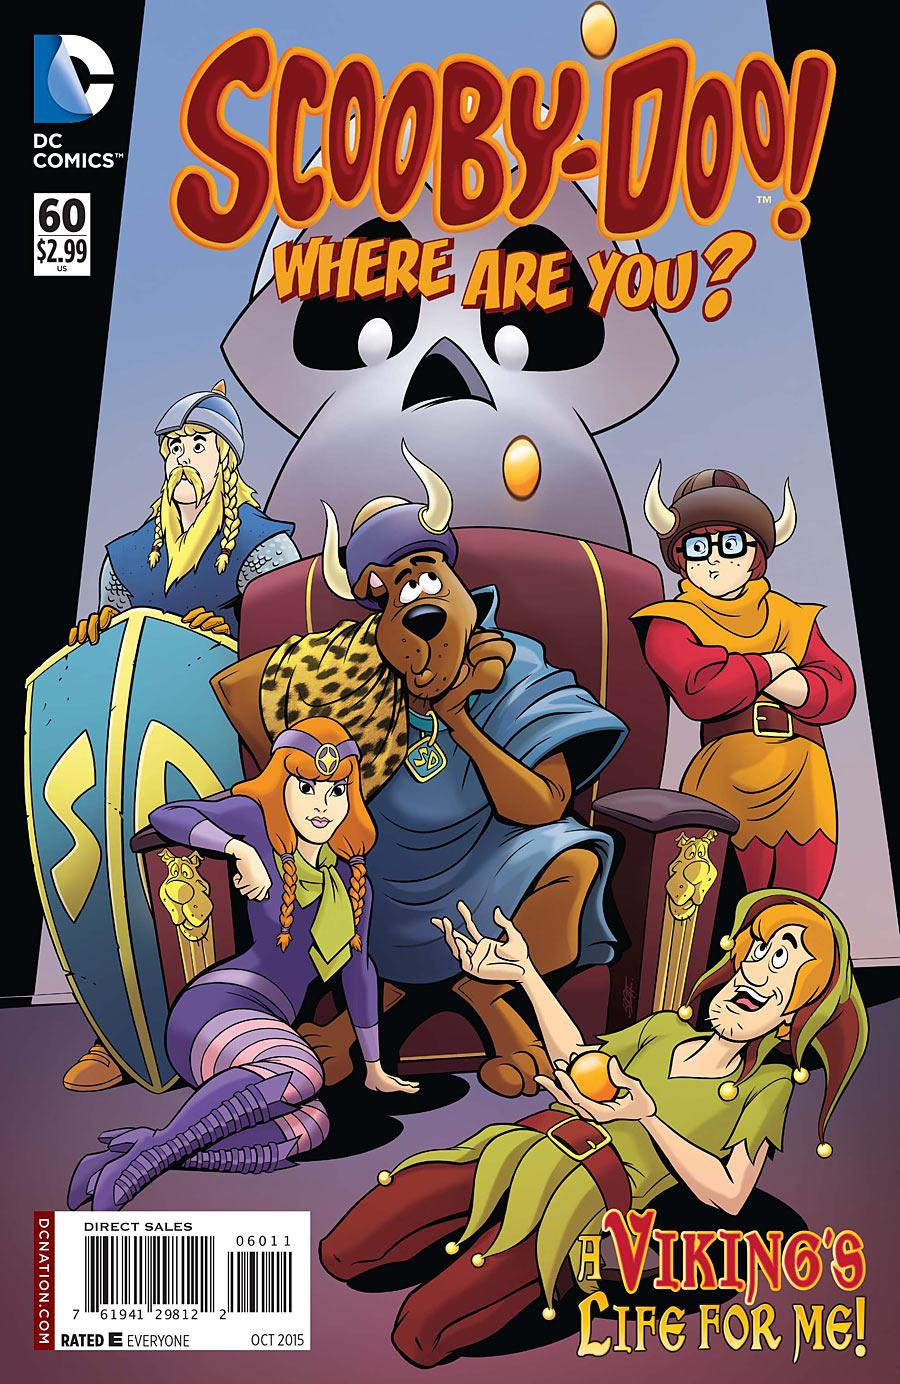 Scooby-Doo: Where Are You? Vol. 1 #60